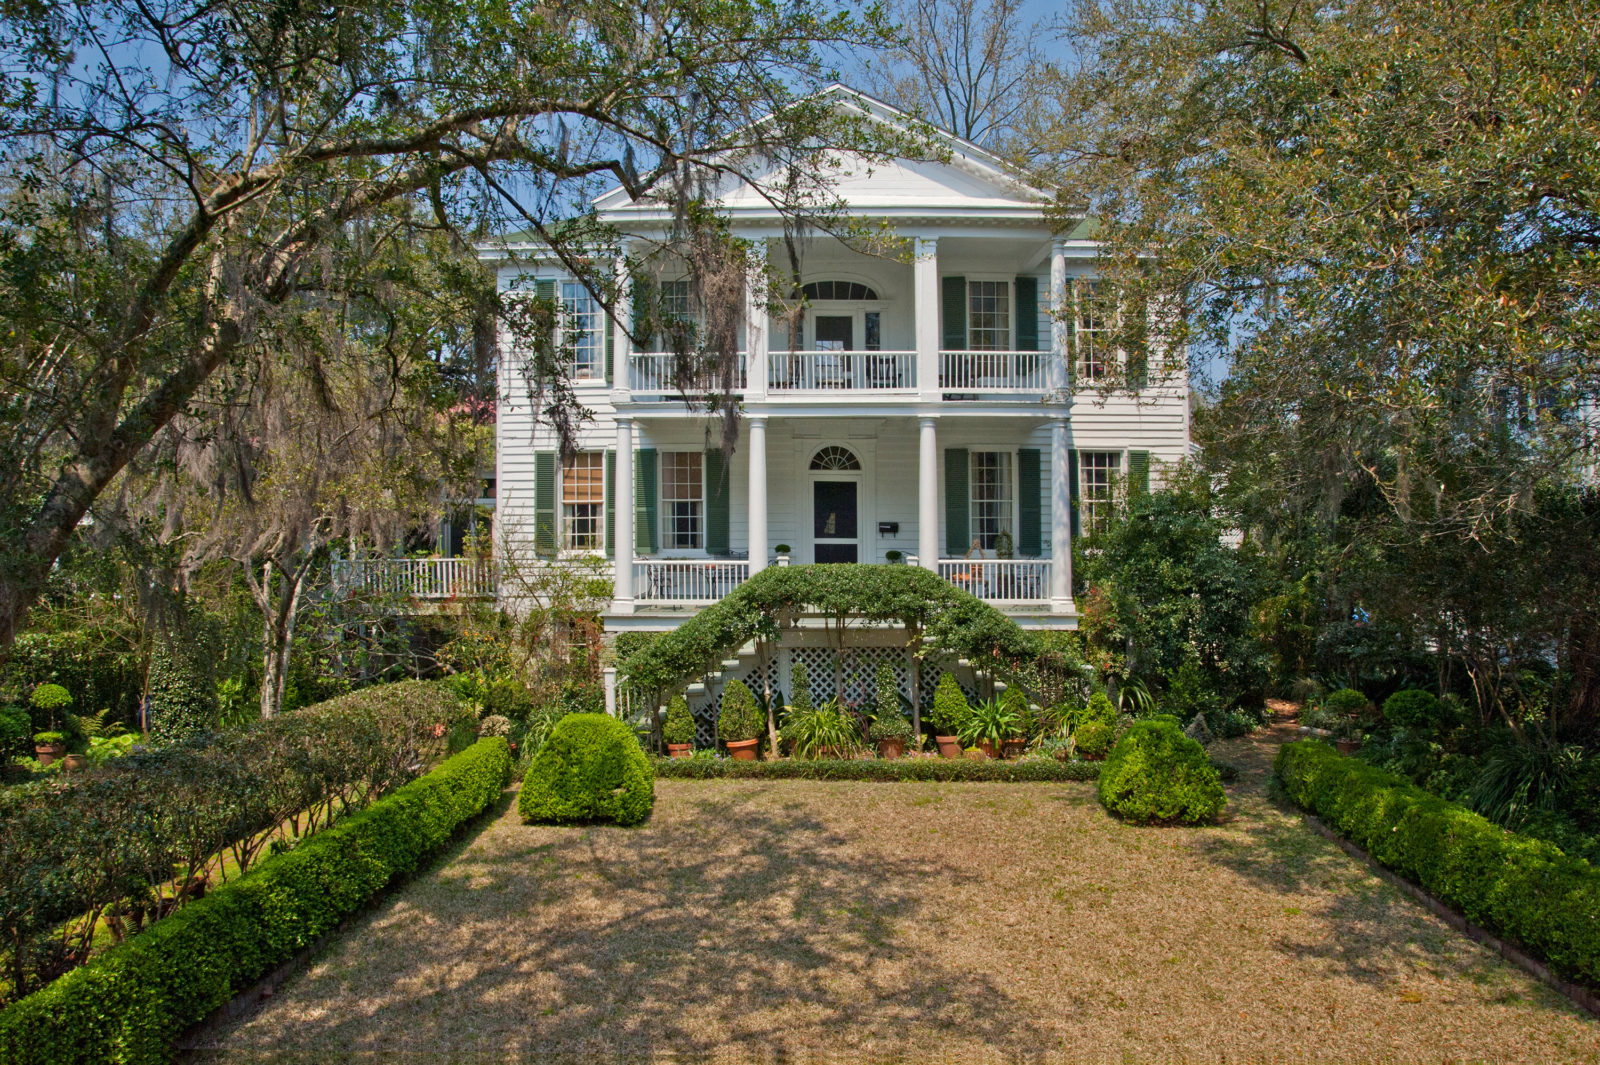 Weekend Agenda: Tour Historic Homes in Beaufort South Carolina